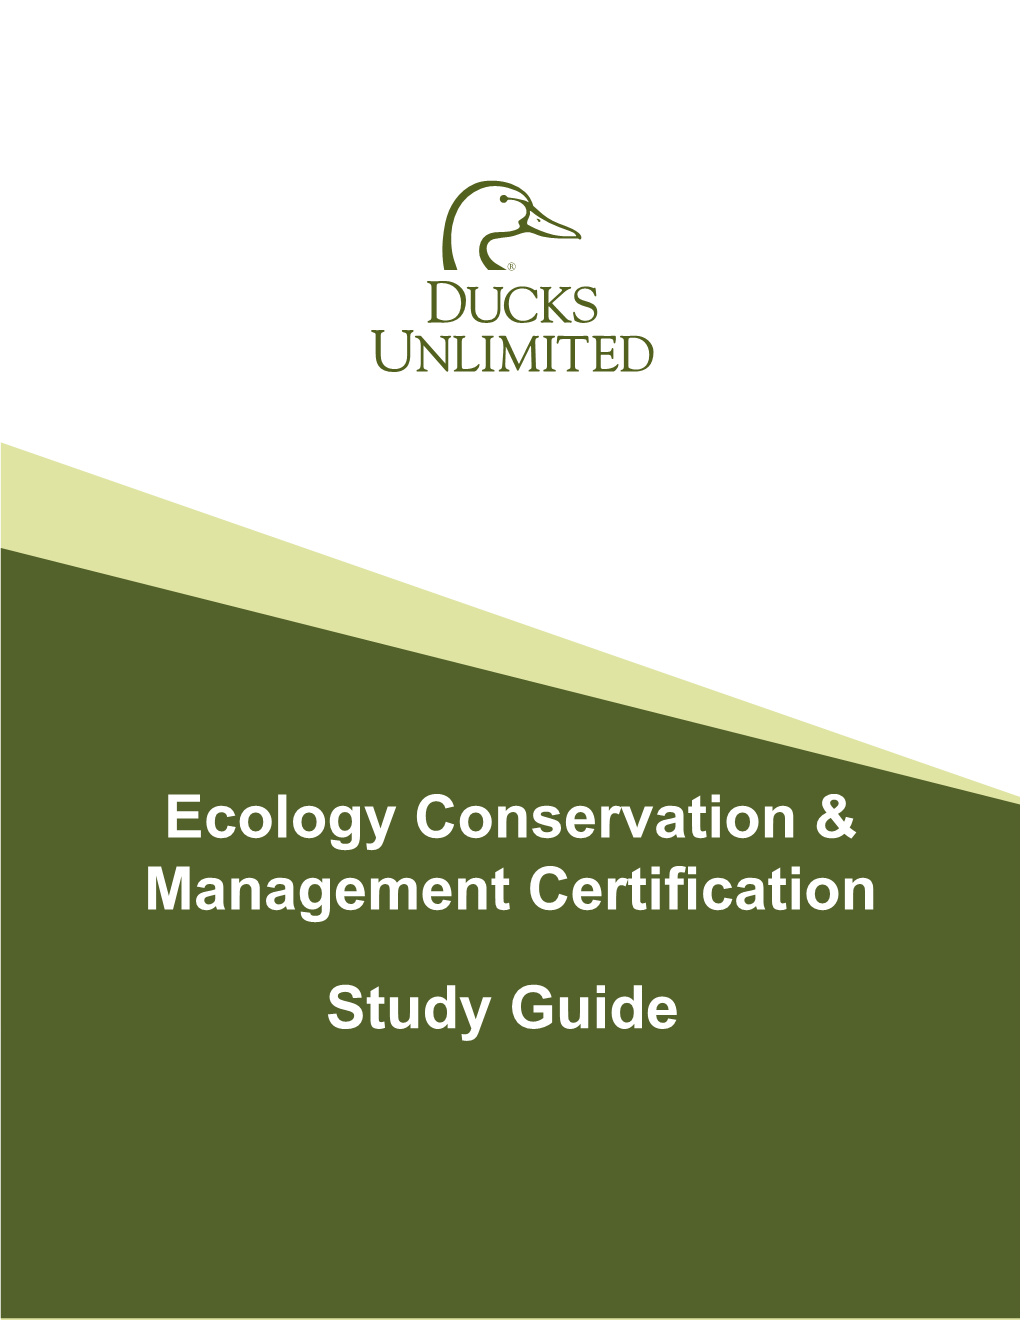 Ecology Conservation & Management Certification Study Guide